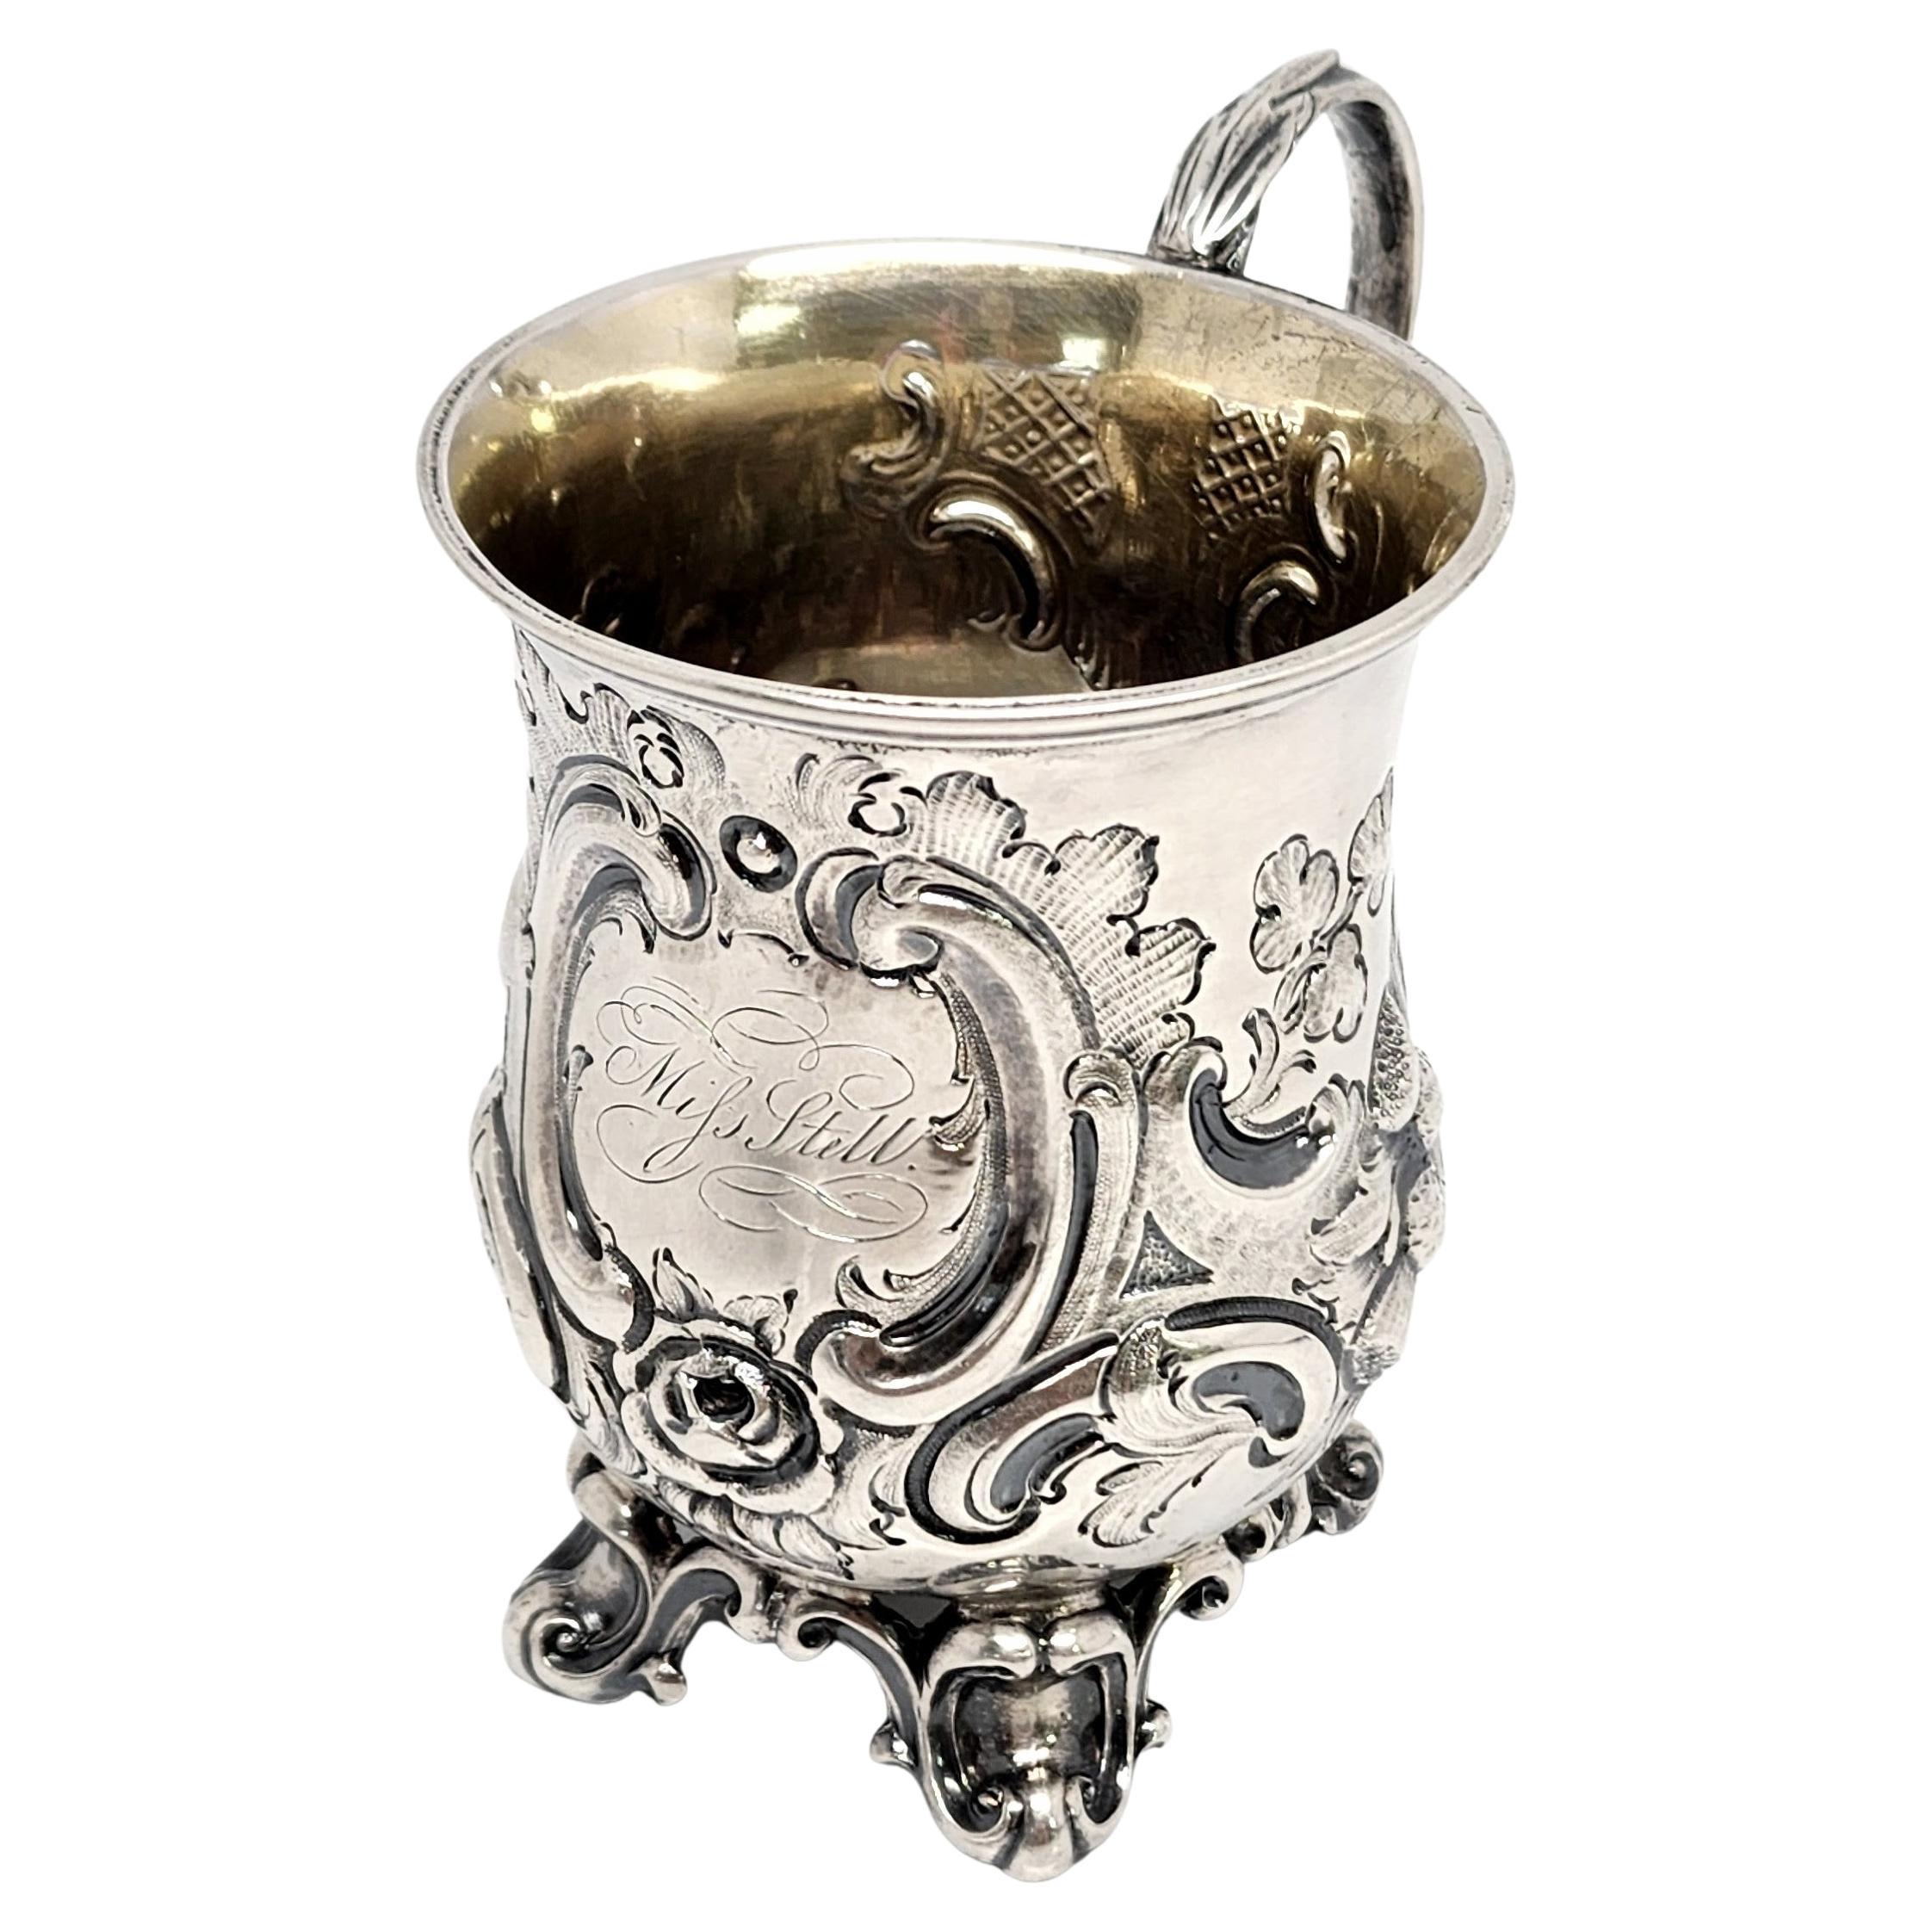 Antique George Angell London England Sterling Silver Footed Cup with Monogram For Sale